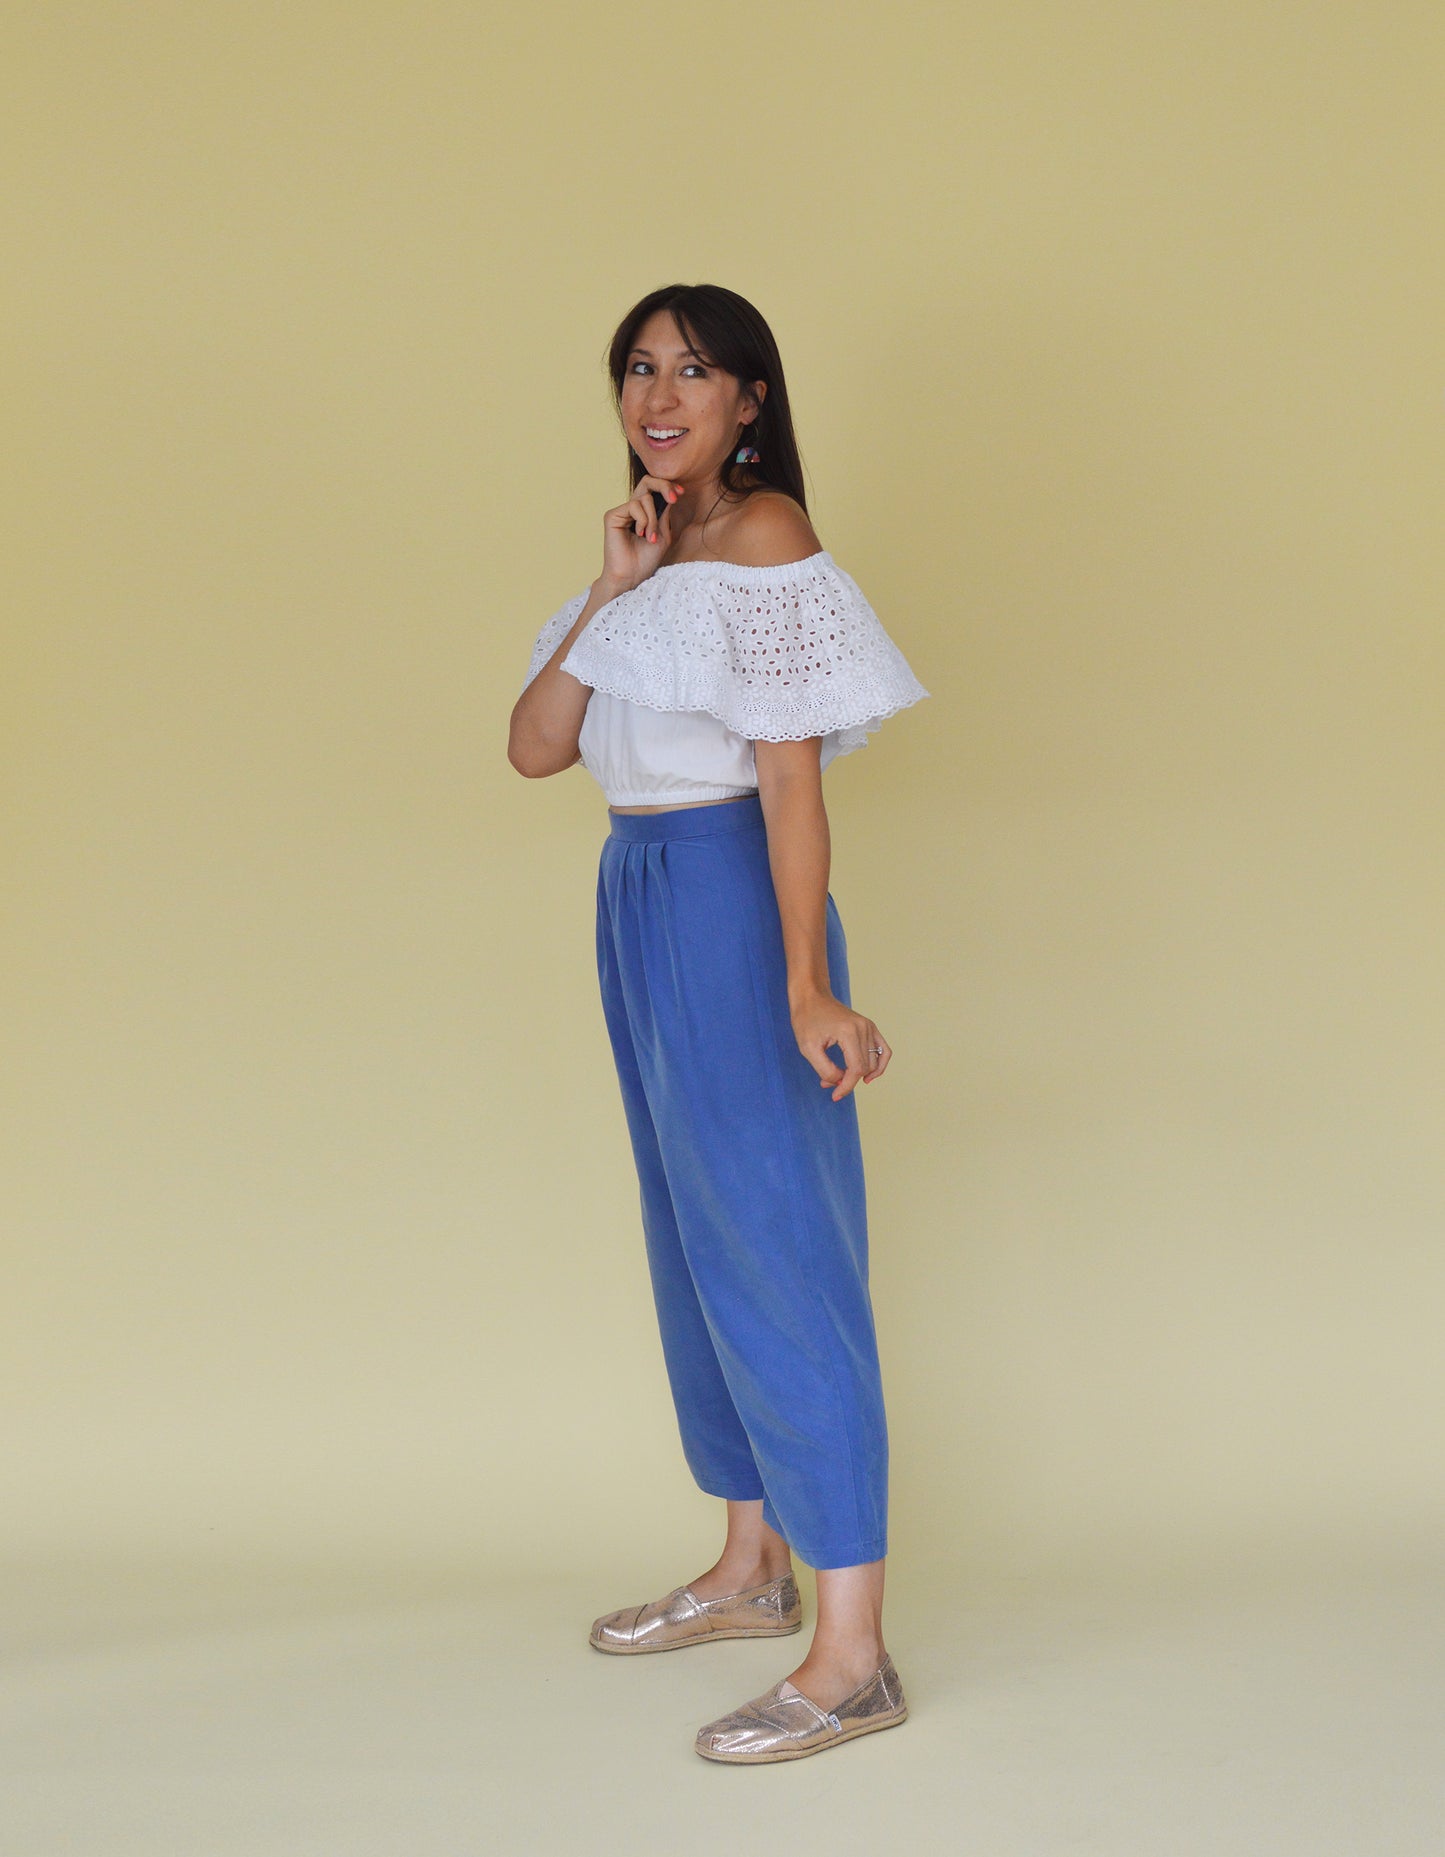 Summer Essentials: Moselle Ruffle Top and Dress